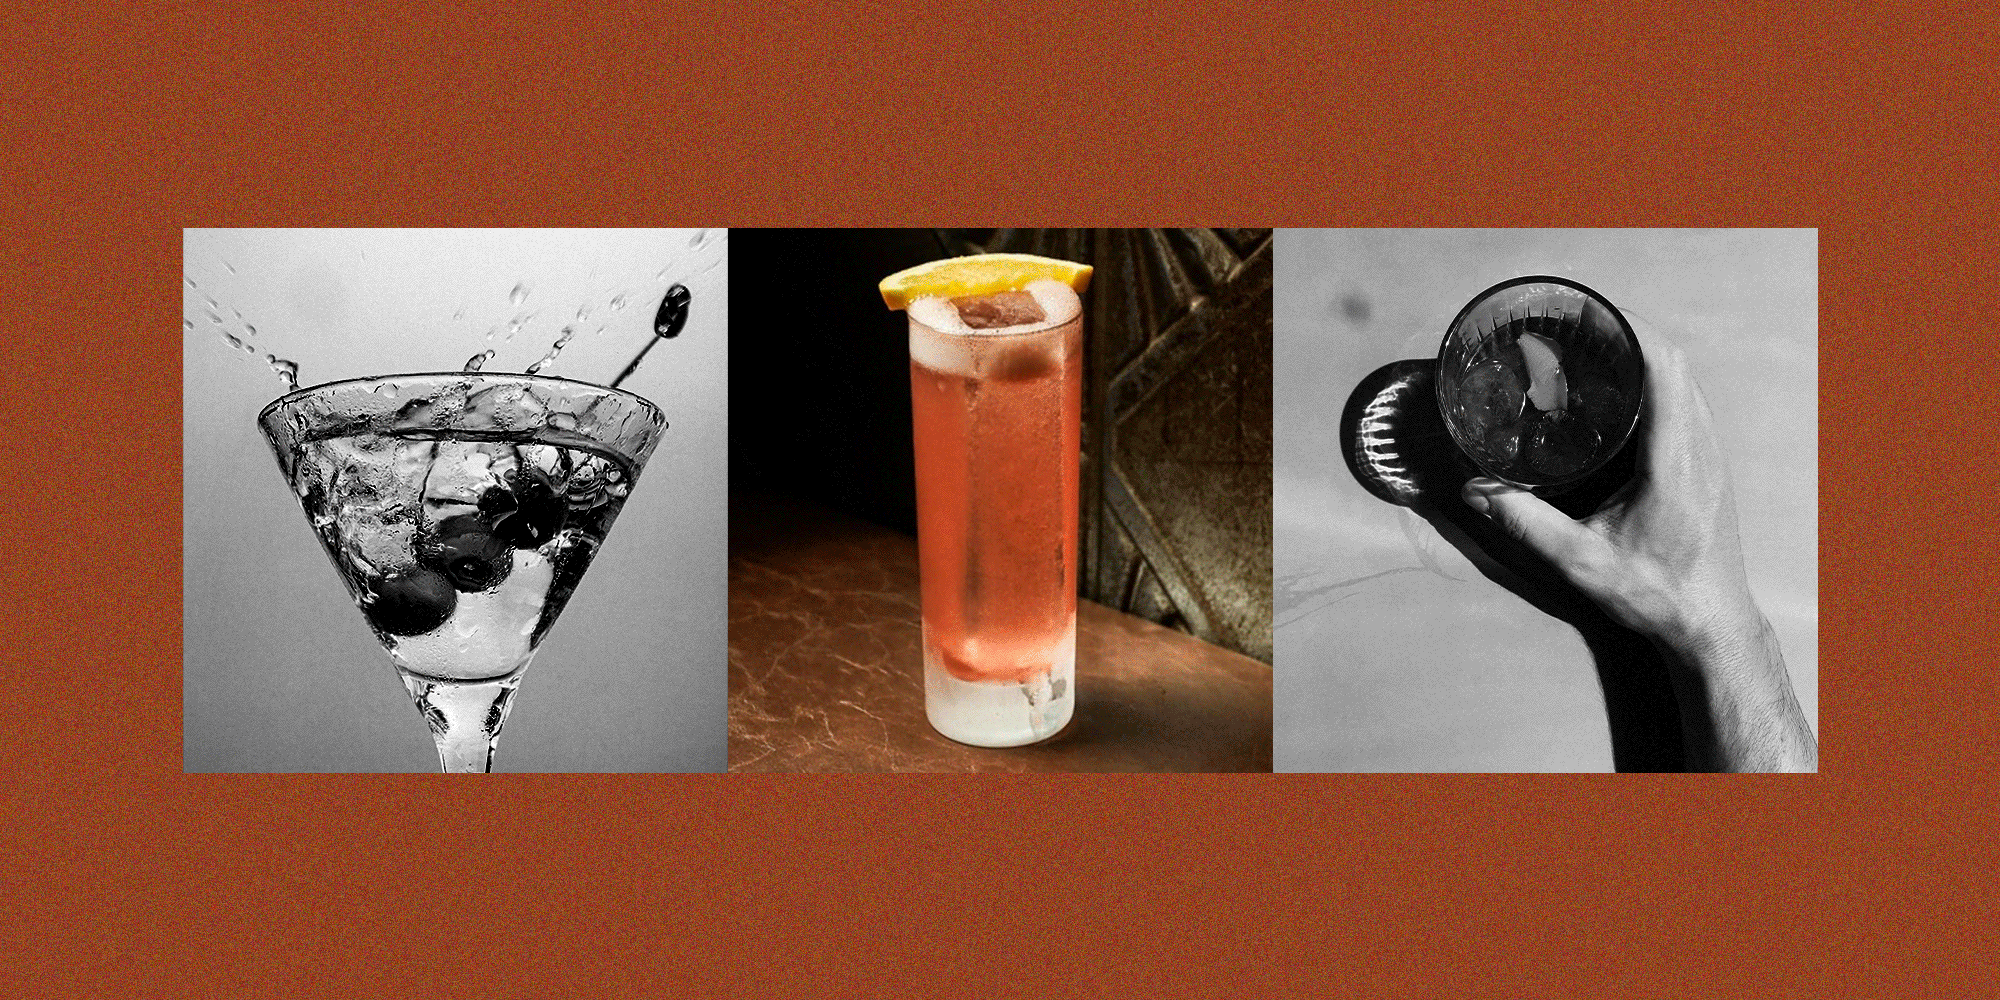 At NYC’s Hottest Bars, Order These Sleeper Hits Instead of Their Most Popular Cocktails